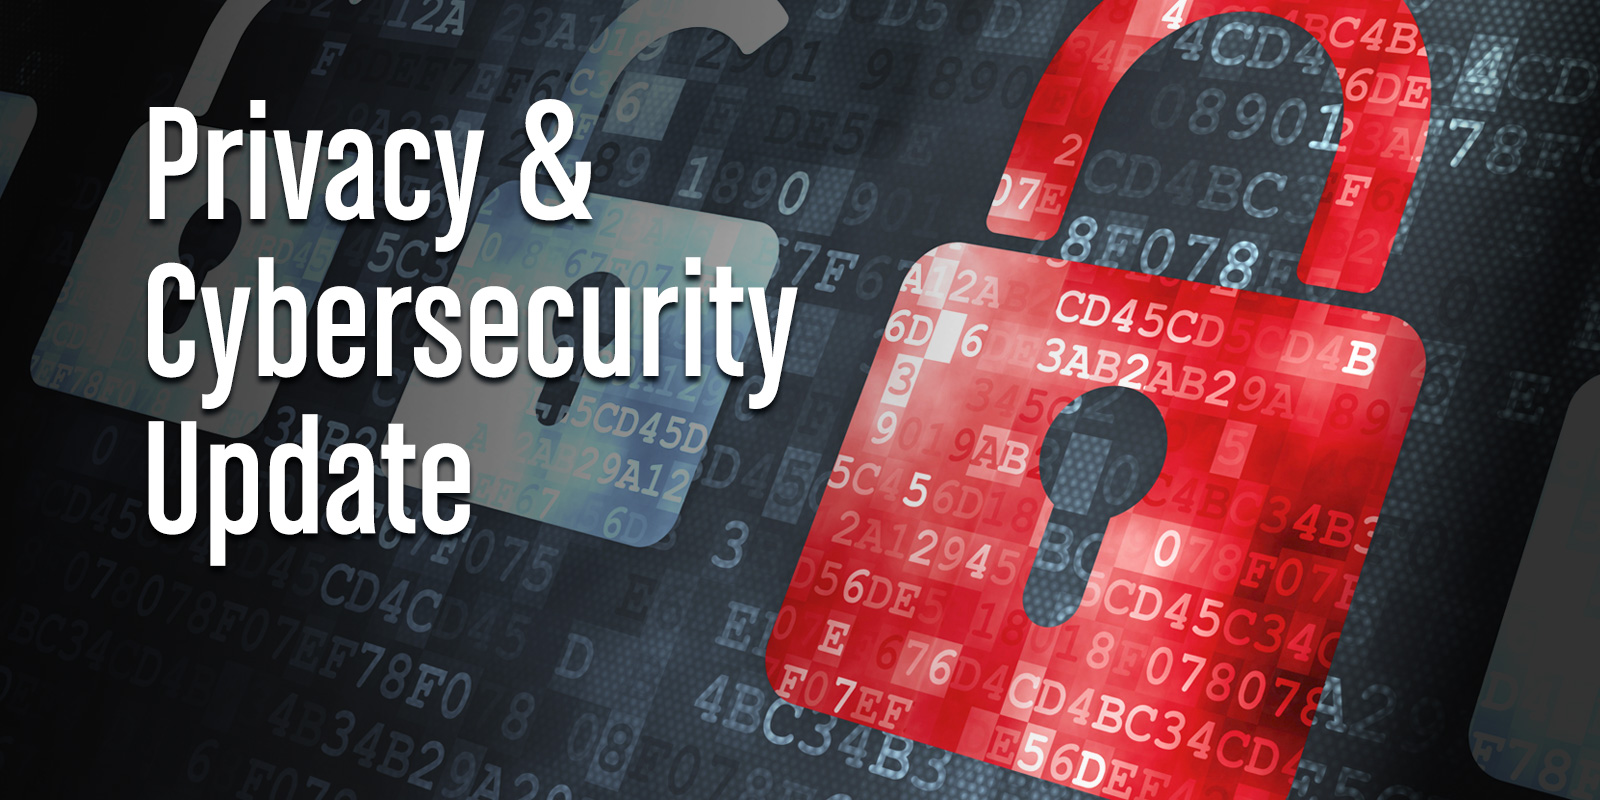 Global Privacy & Cybersecurity Update Vol. 14